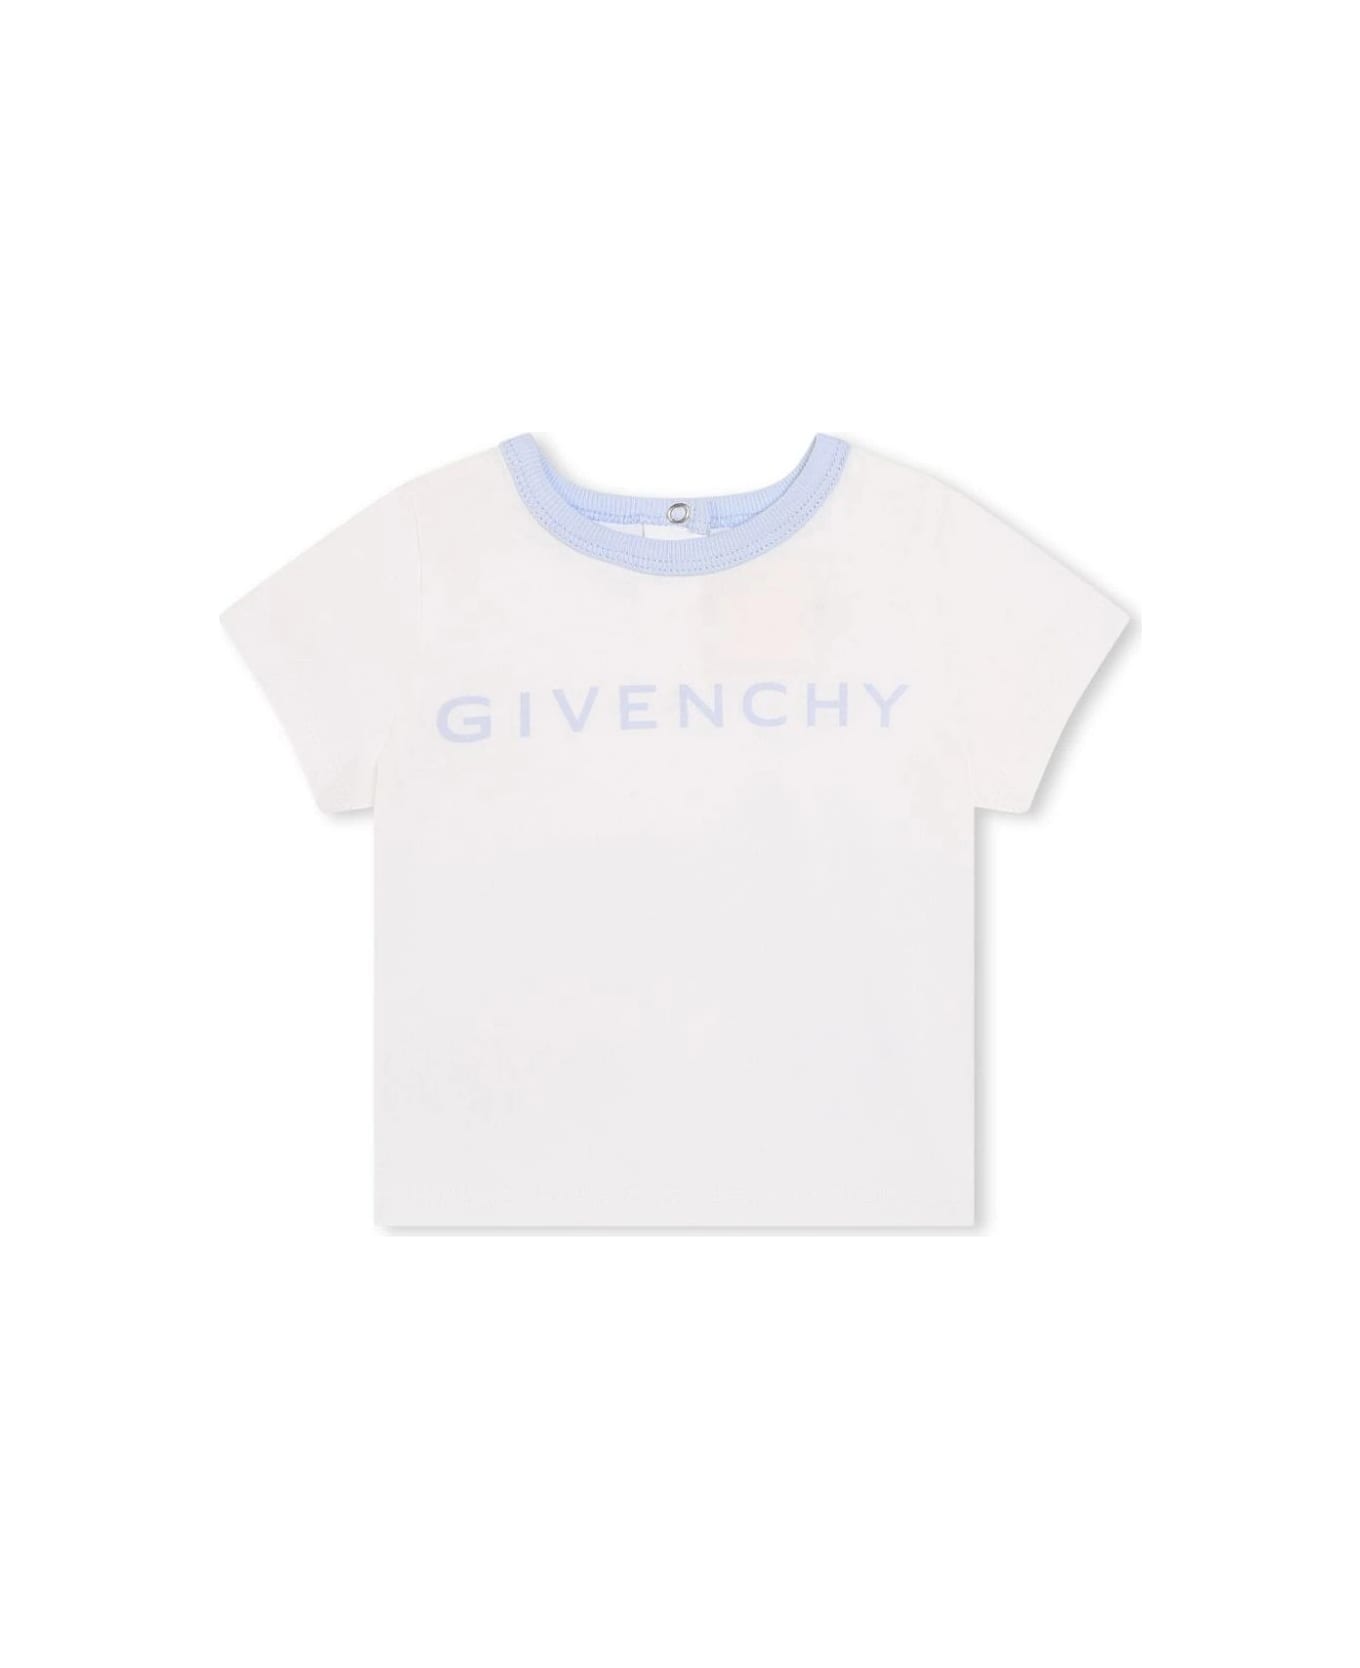 Givenchy 4g T-shirt And Dungaree Set In White And Light Blue - Blue ボディスーツ＆セットアップ